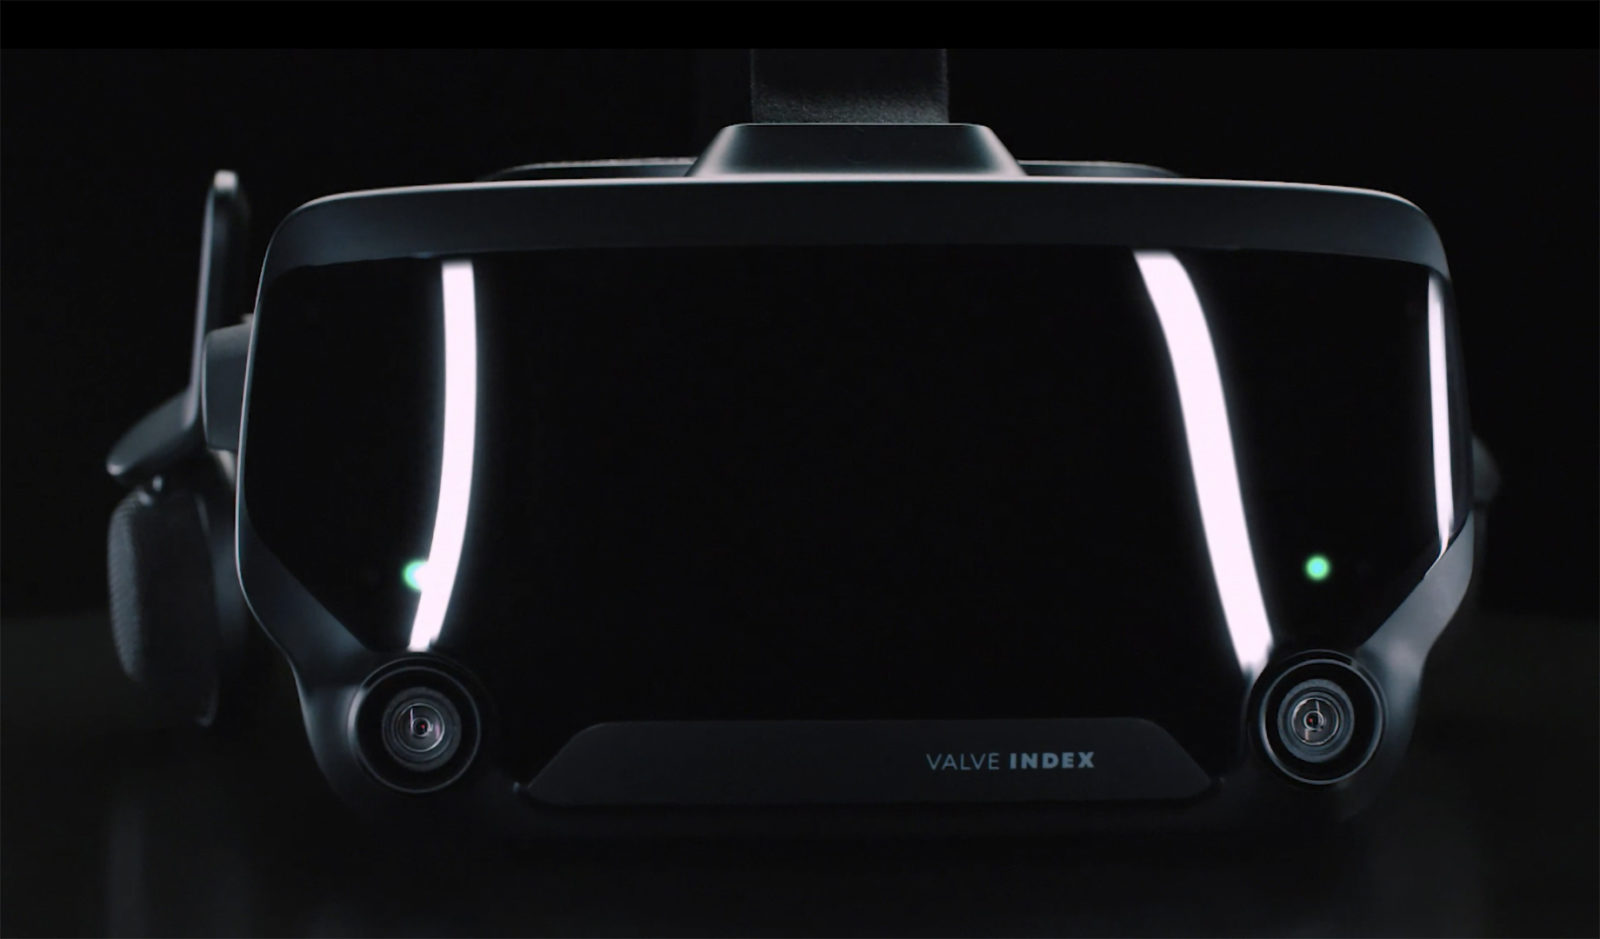 Valve is silently developing a standalone VR headset